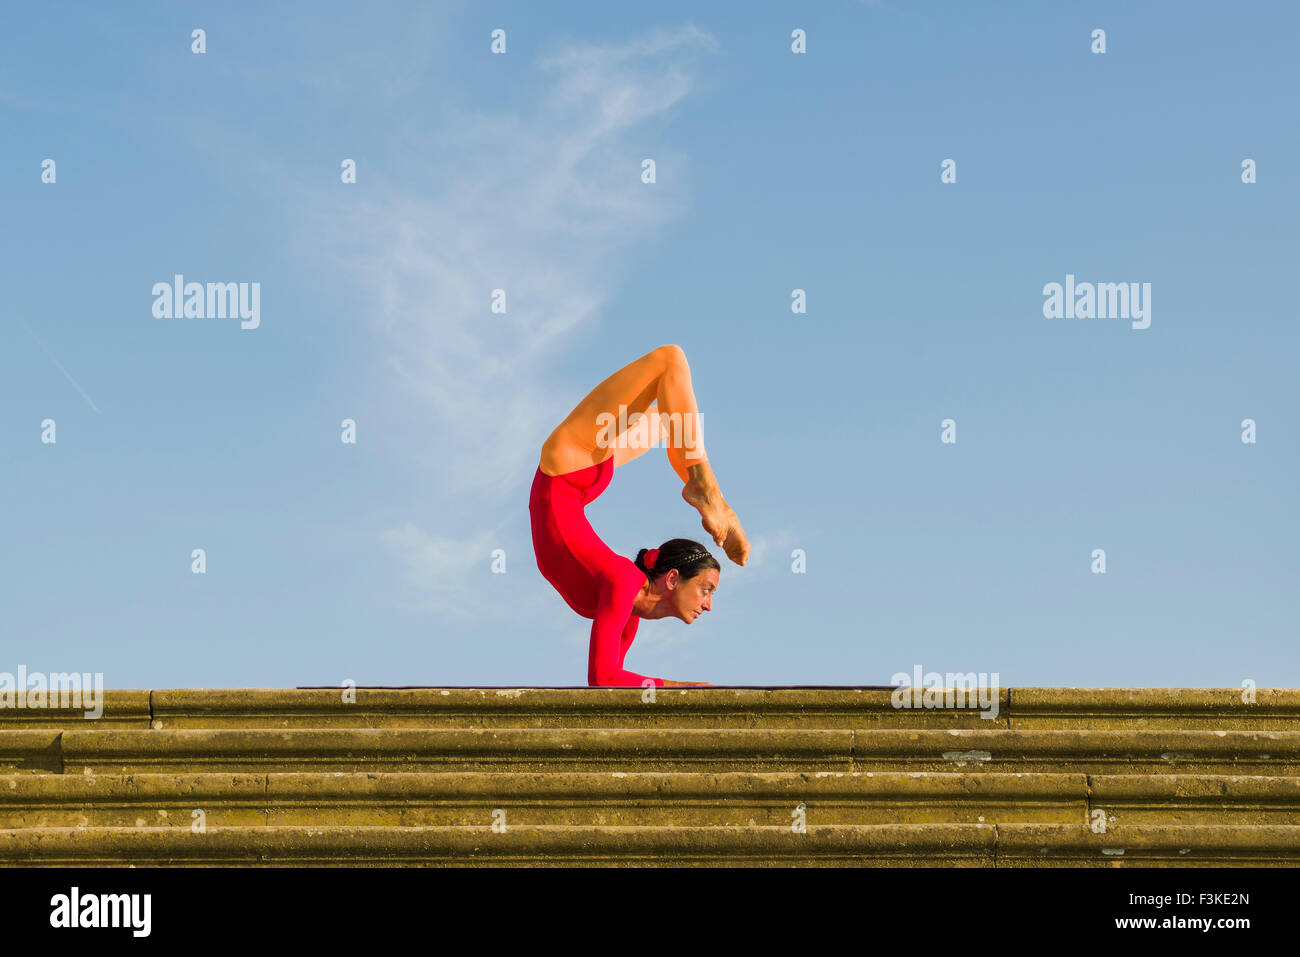 Young woman, wearing a red-orange body suit, is practising Hatha-Yoga outdoor, showing the pose: vrischikasana, scorpion pose Stock Photo